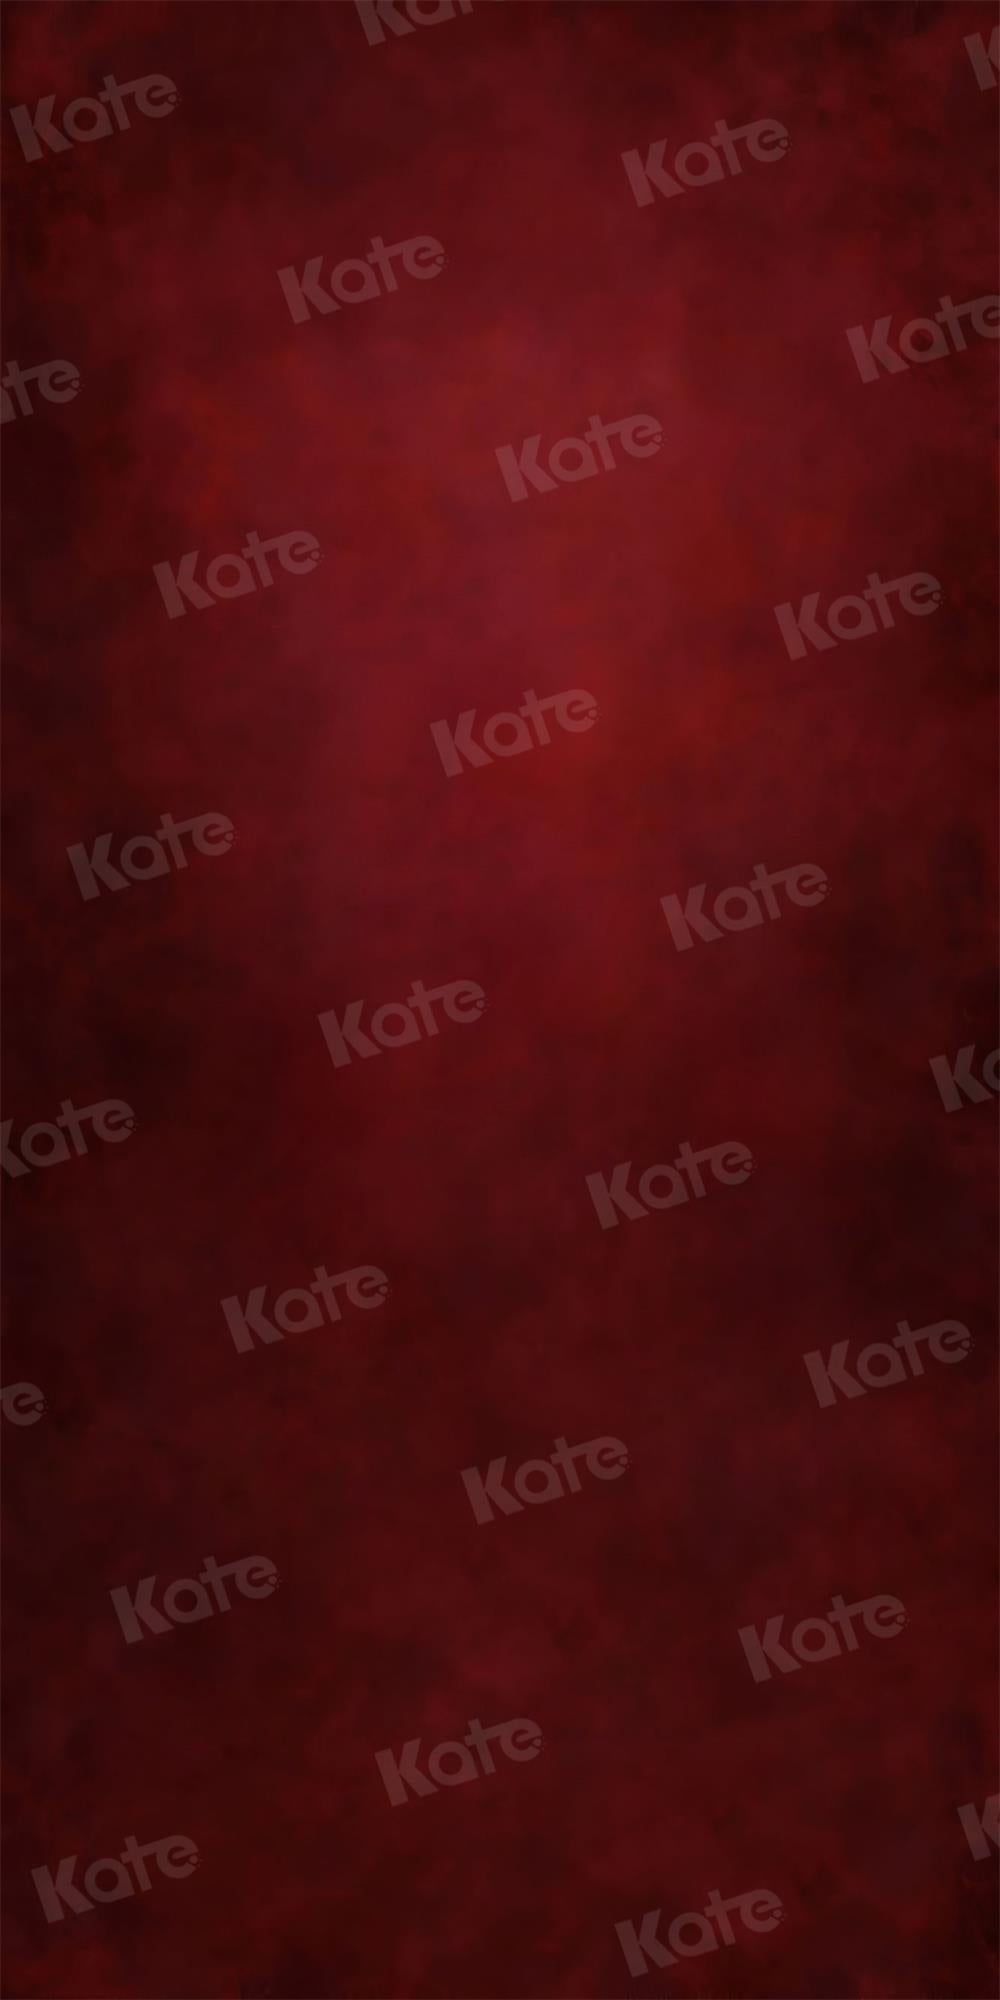 Kate Sweep Backdrop Red Portrait Abstract For Photography - Kate Backdrop